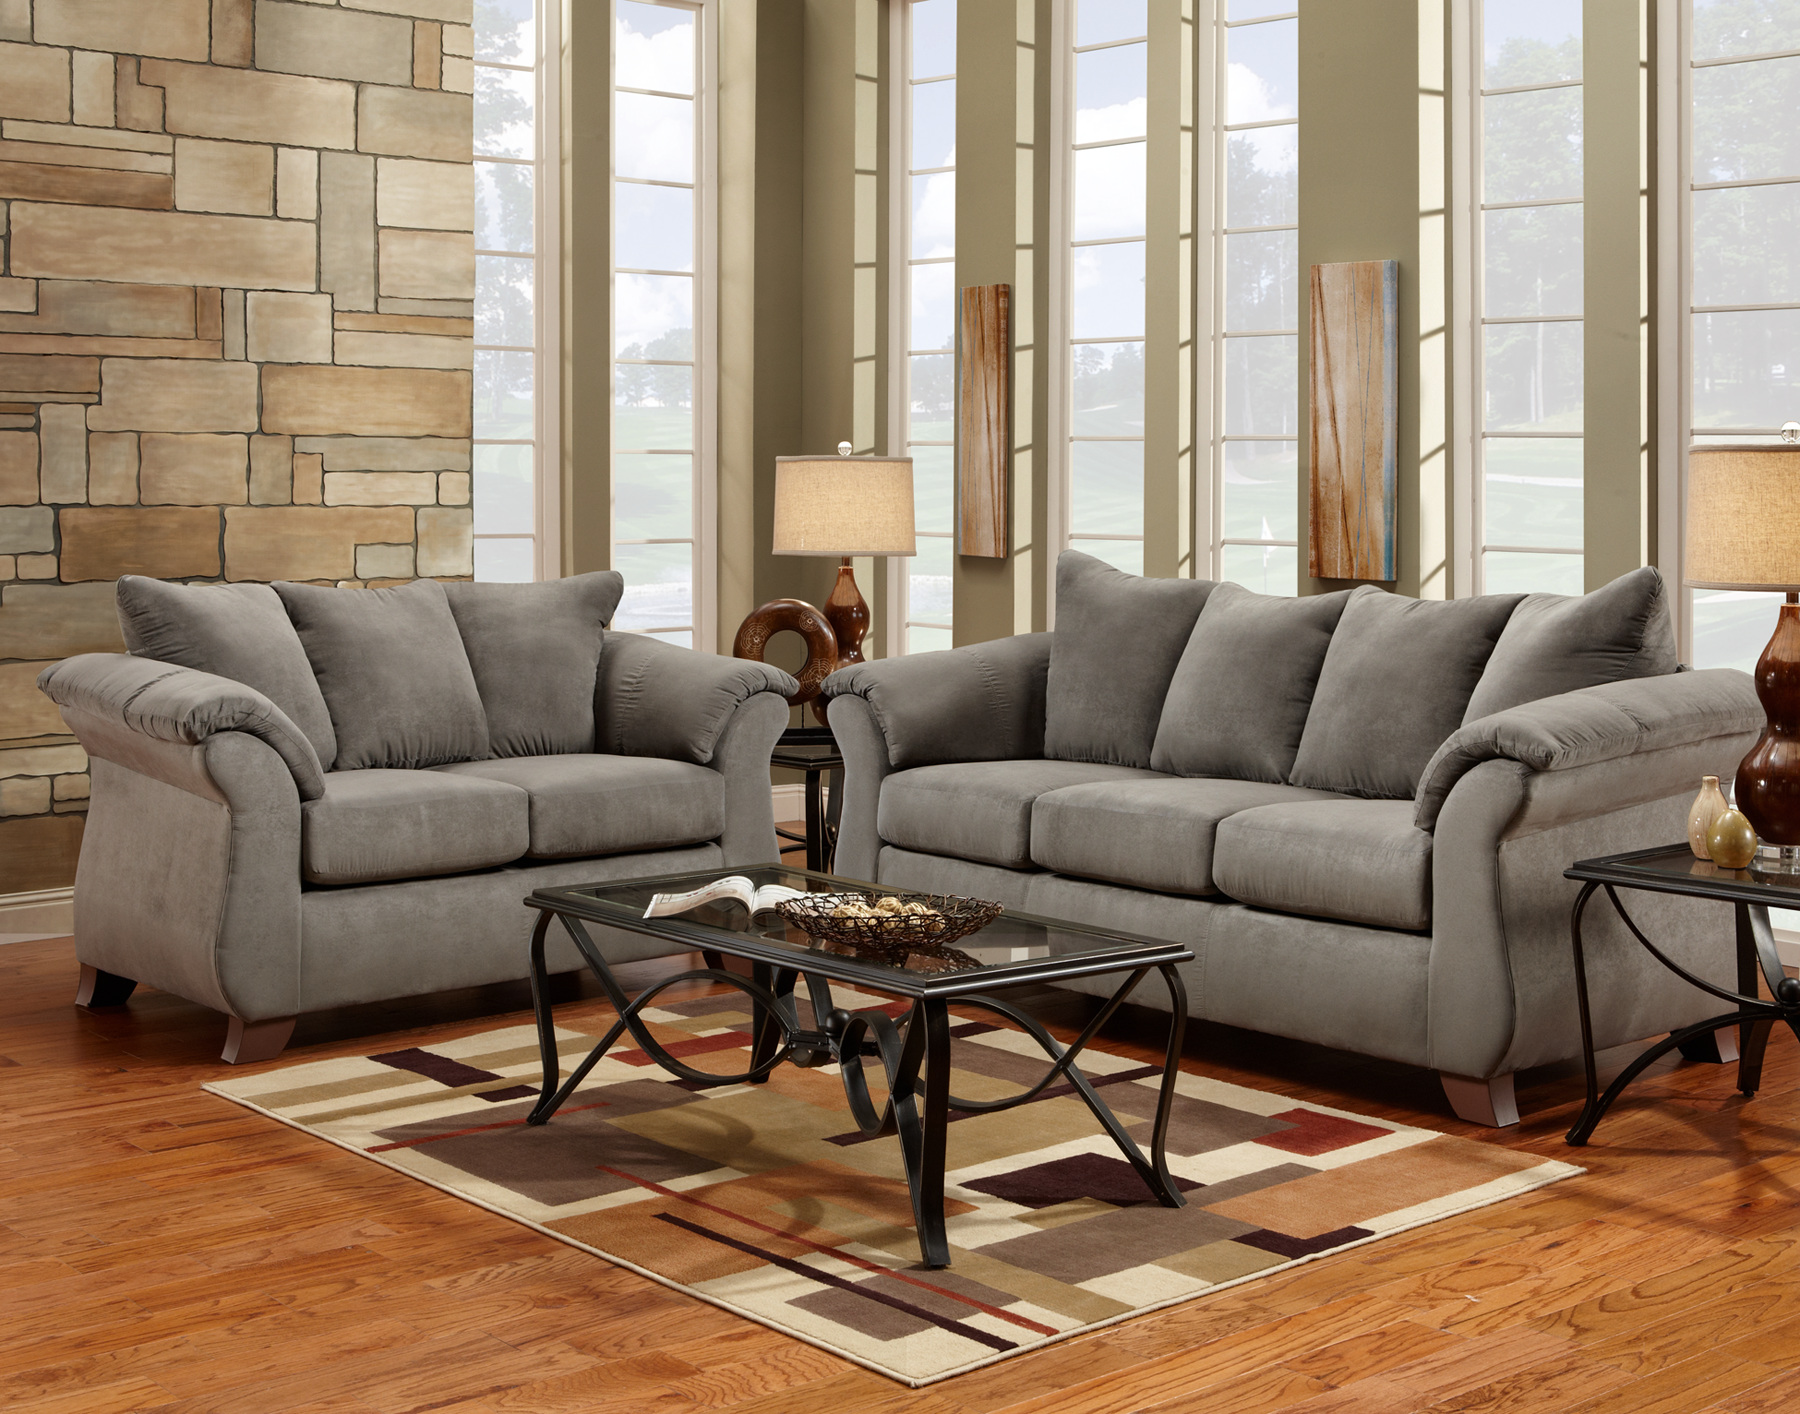 grey couches in living room